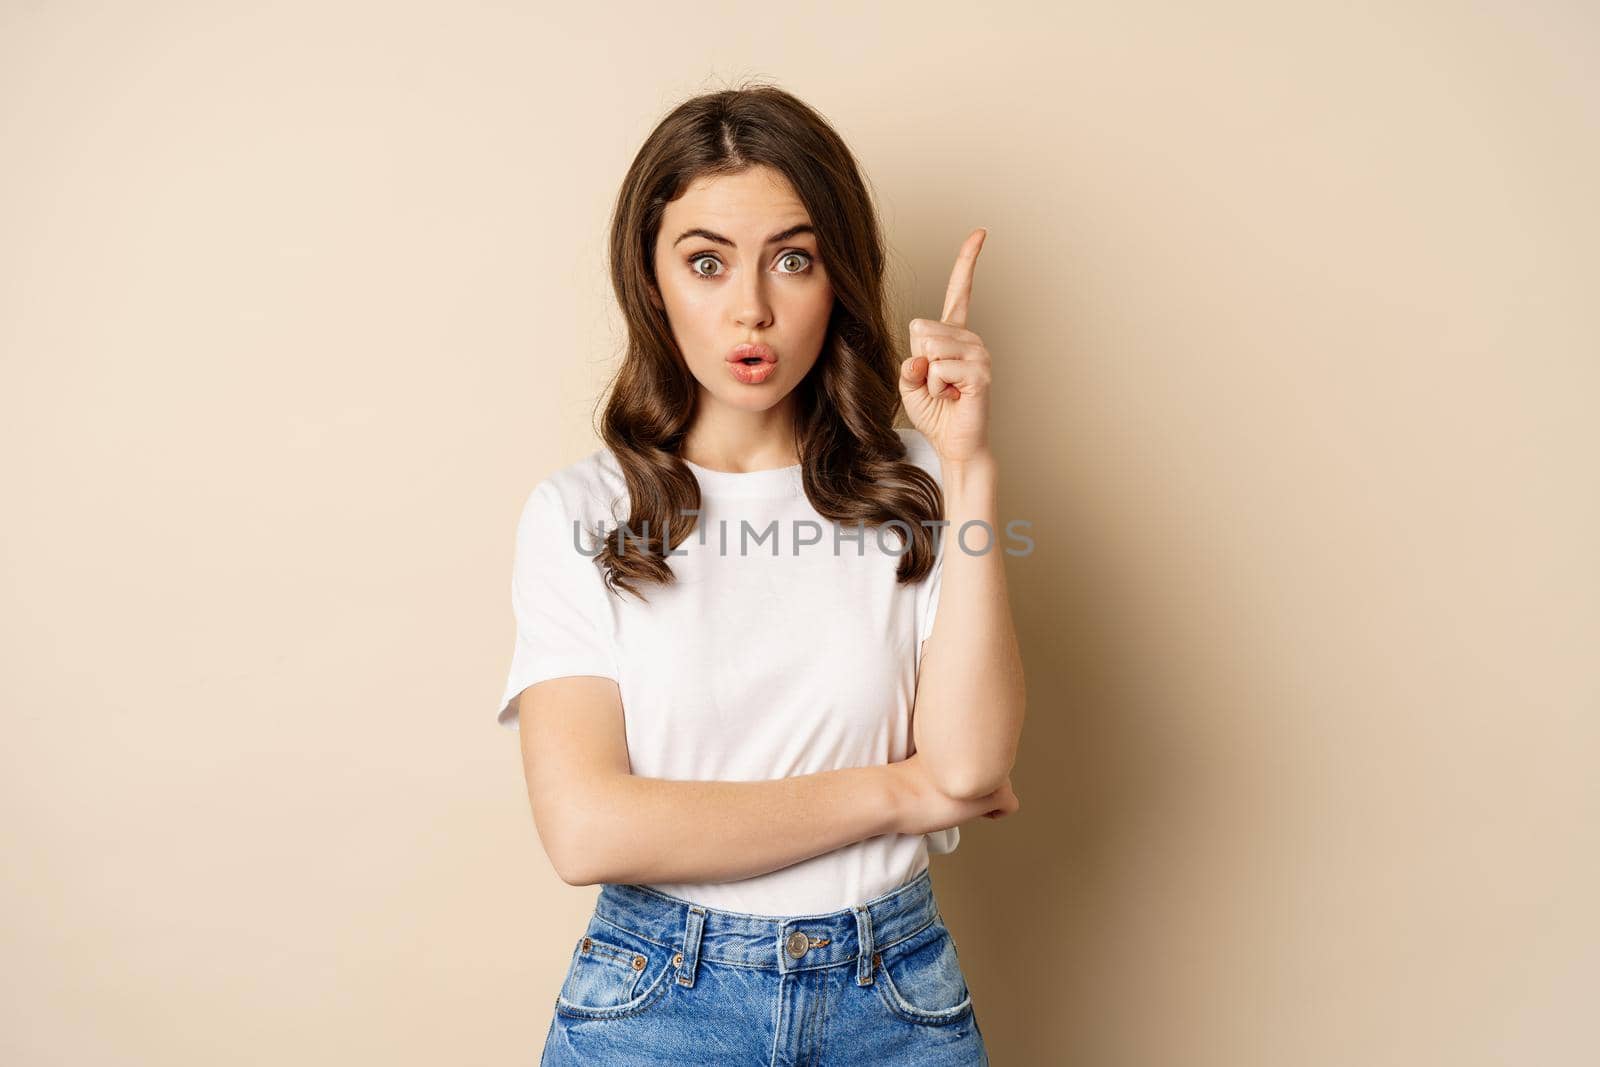 Excited woman raising finger, pitching an idea, has suggestion, wearing white t-shirt and jeans over beige background.